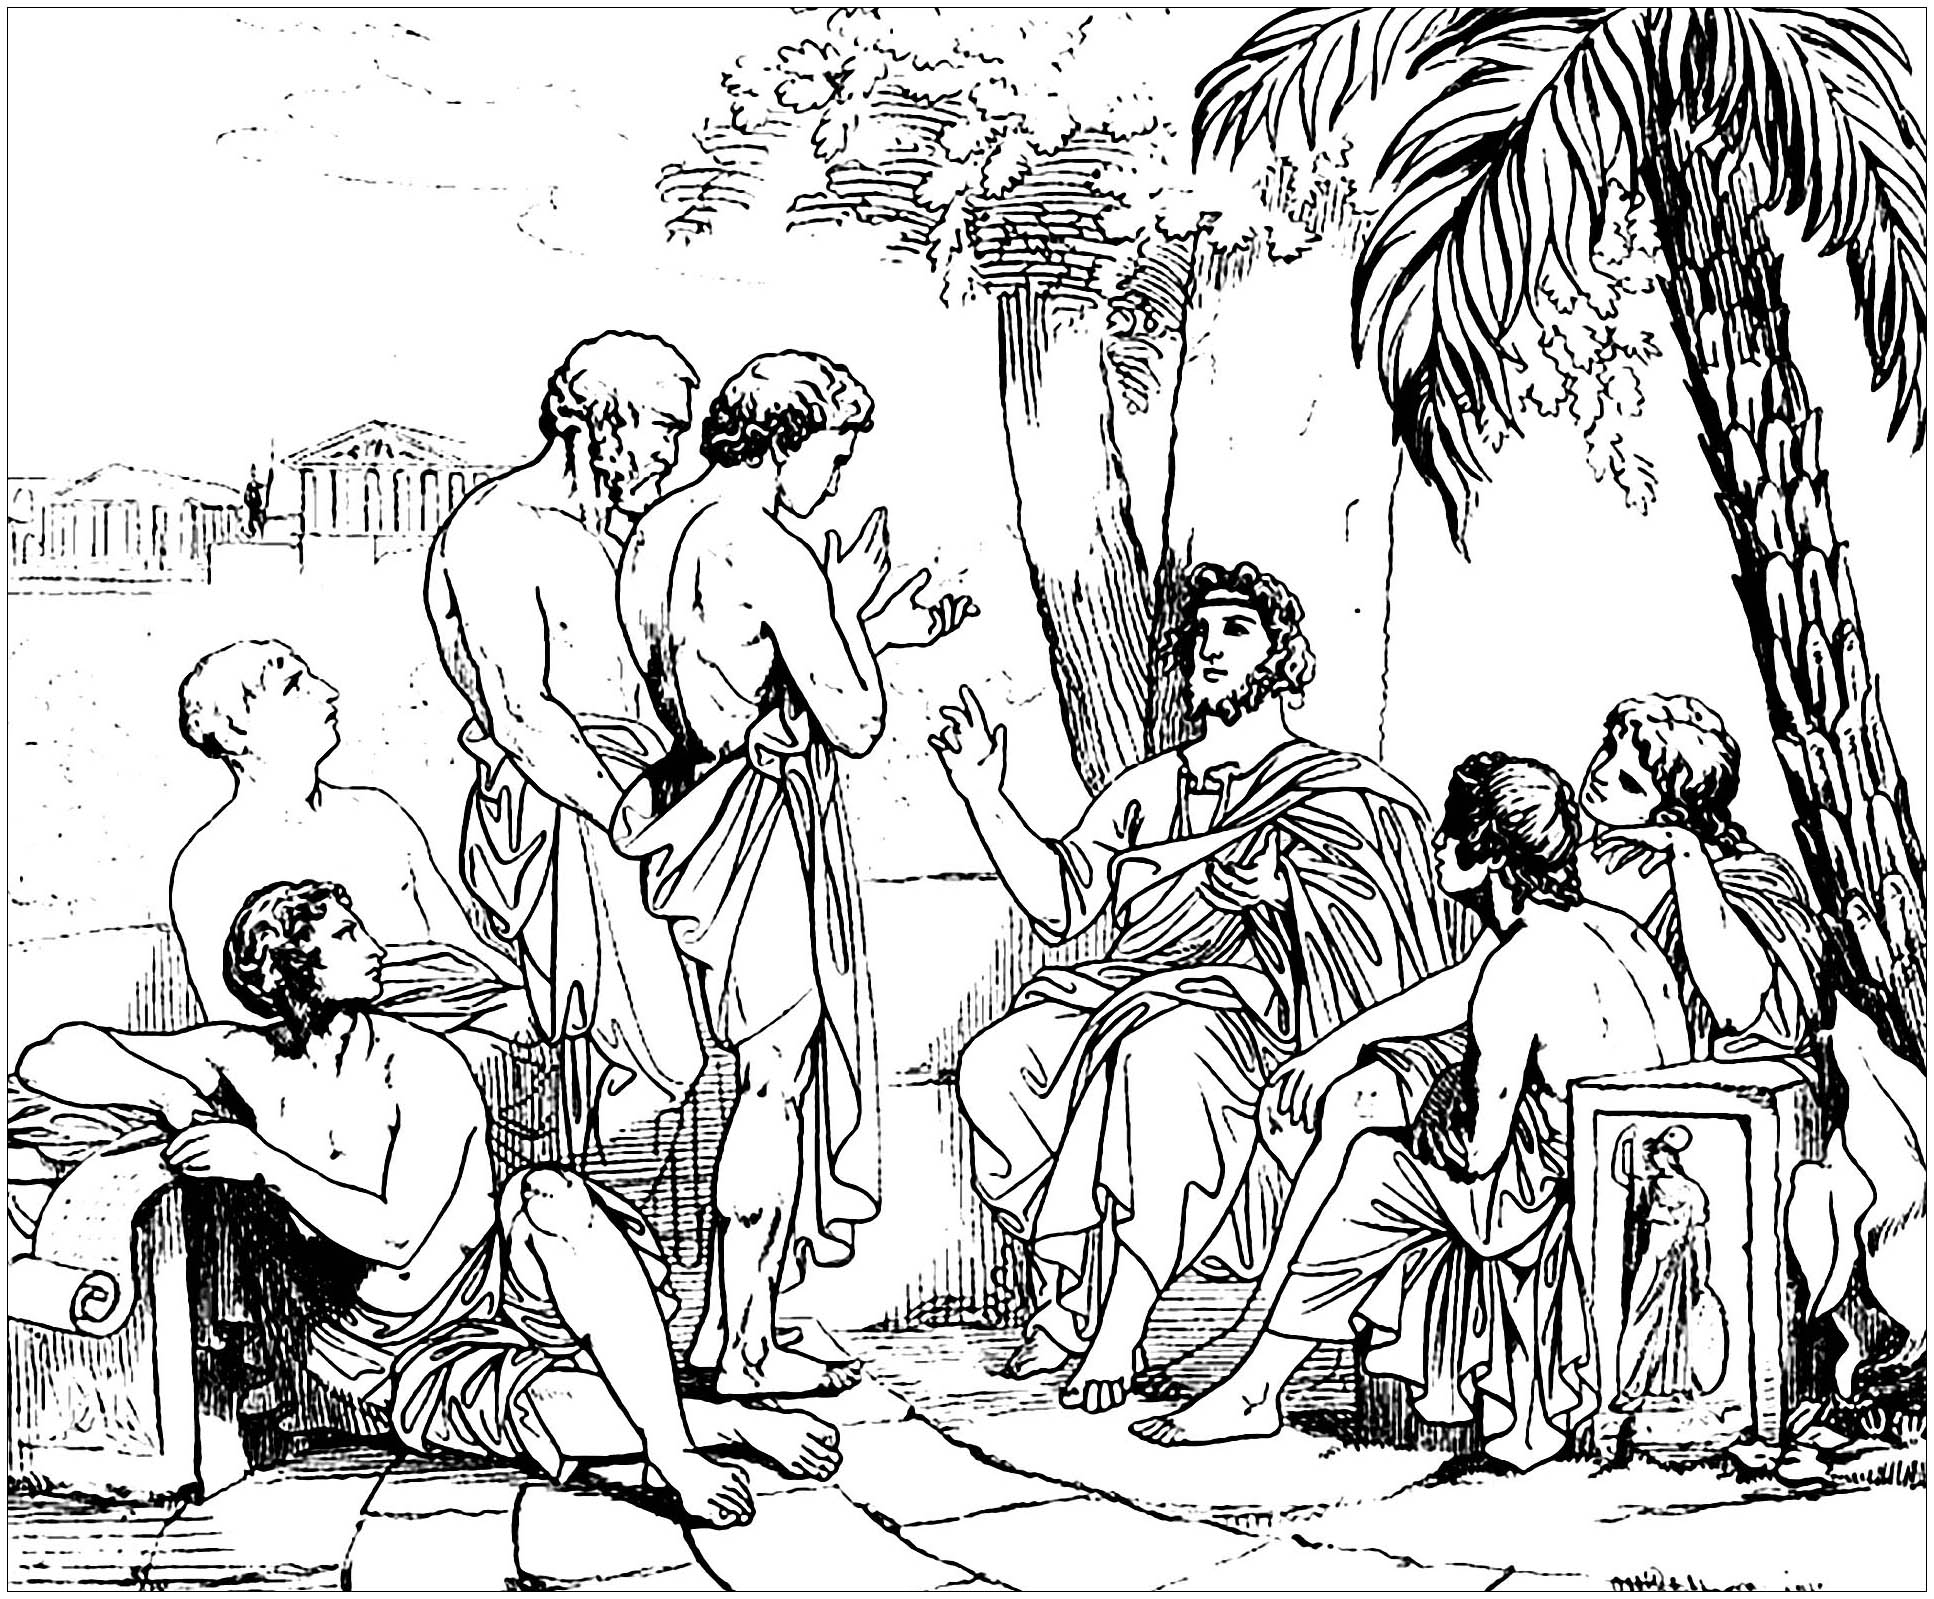 Plato in his academy, by an Unknown Xylographer (1879). from the Swedish journal Svenska Familj-Journalen (1862-1887)